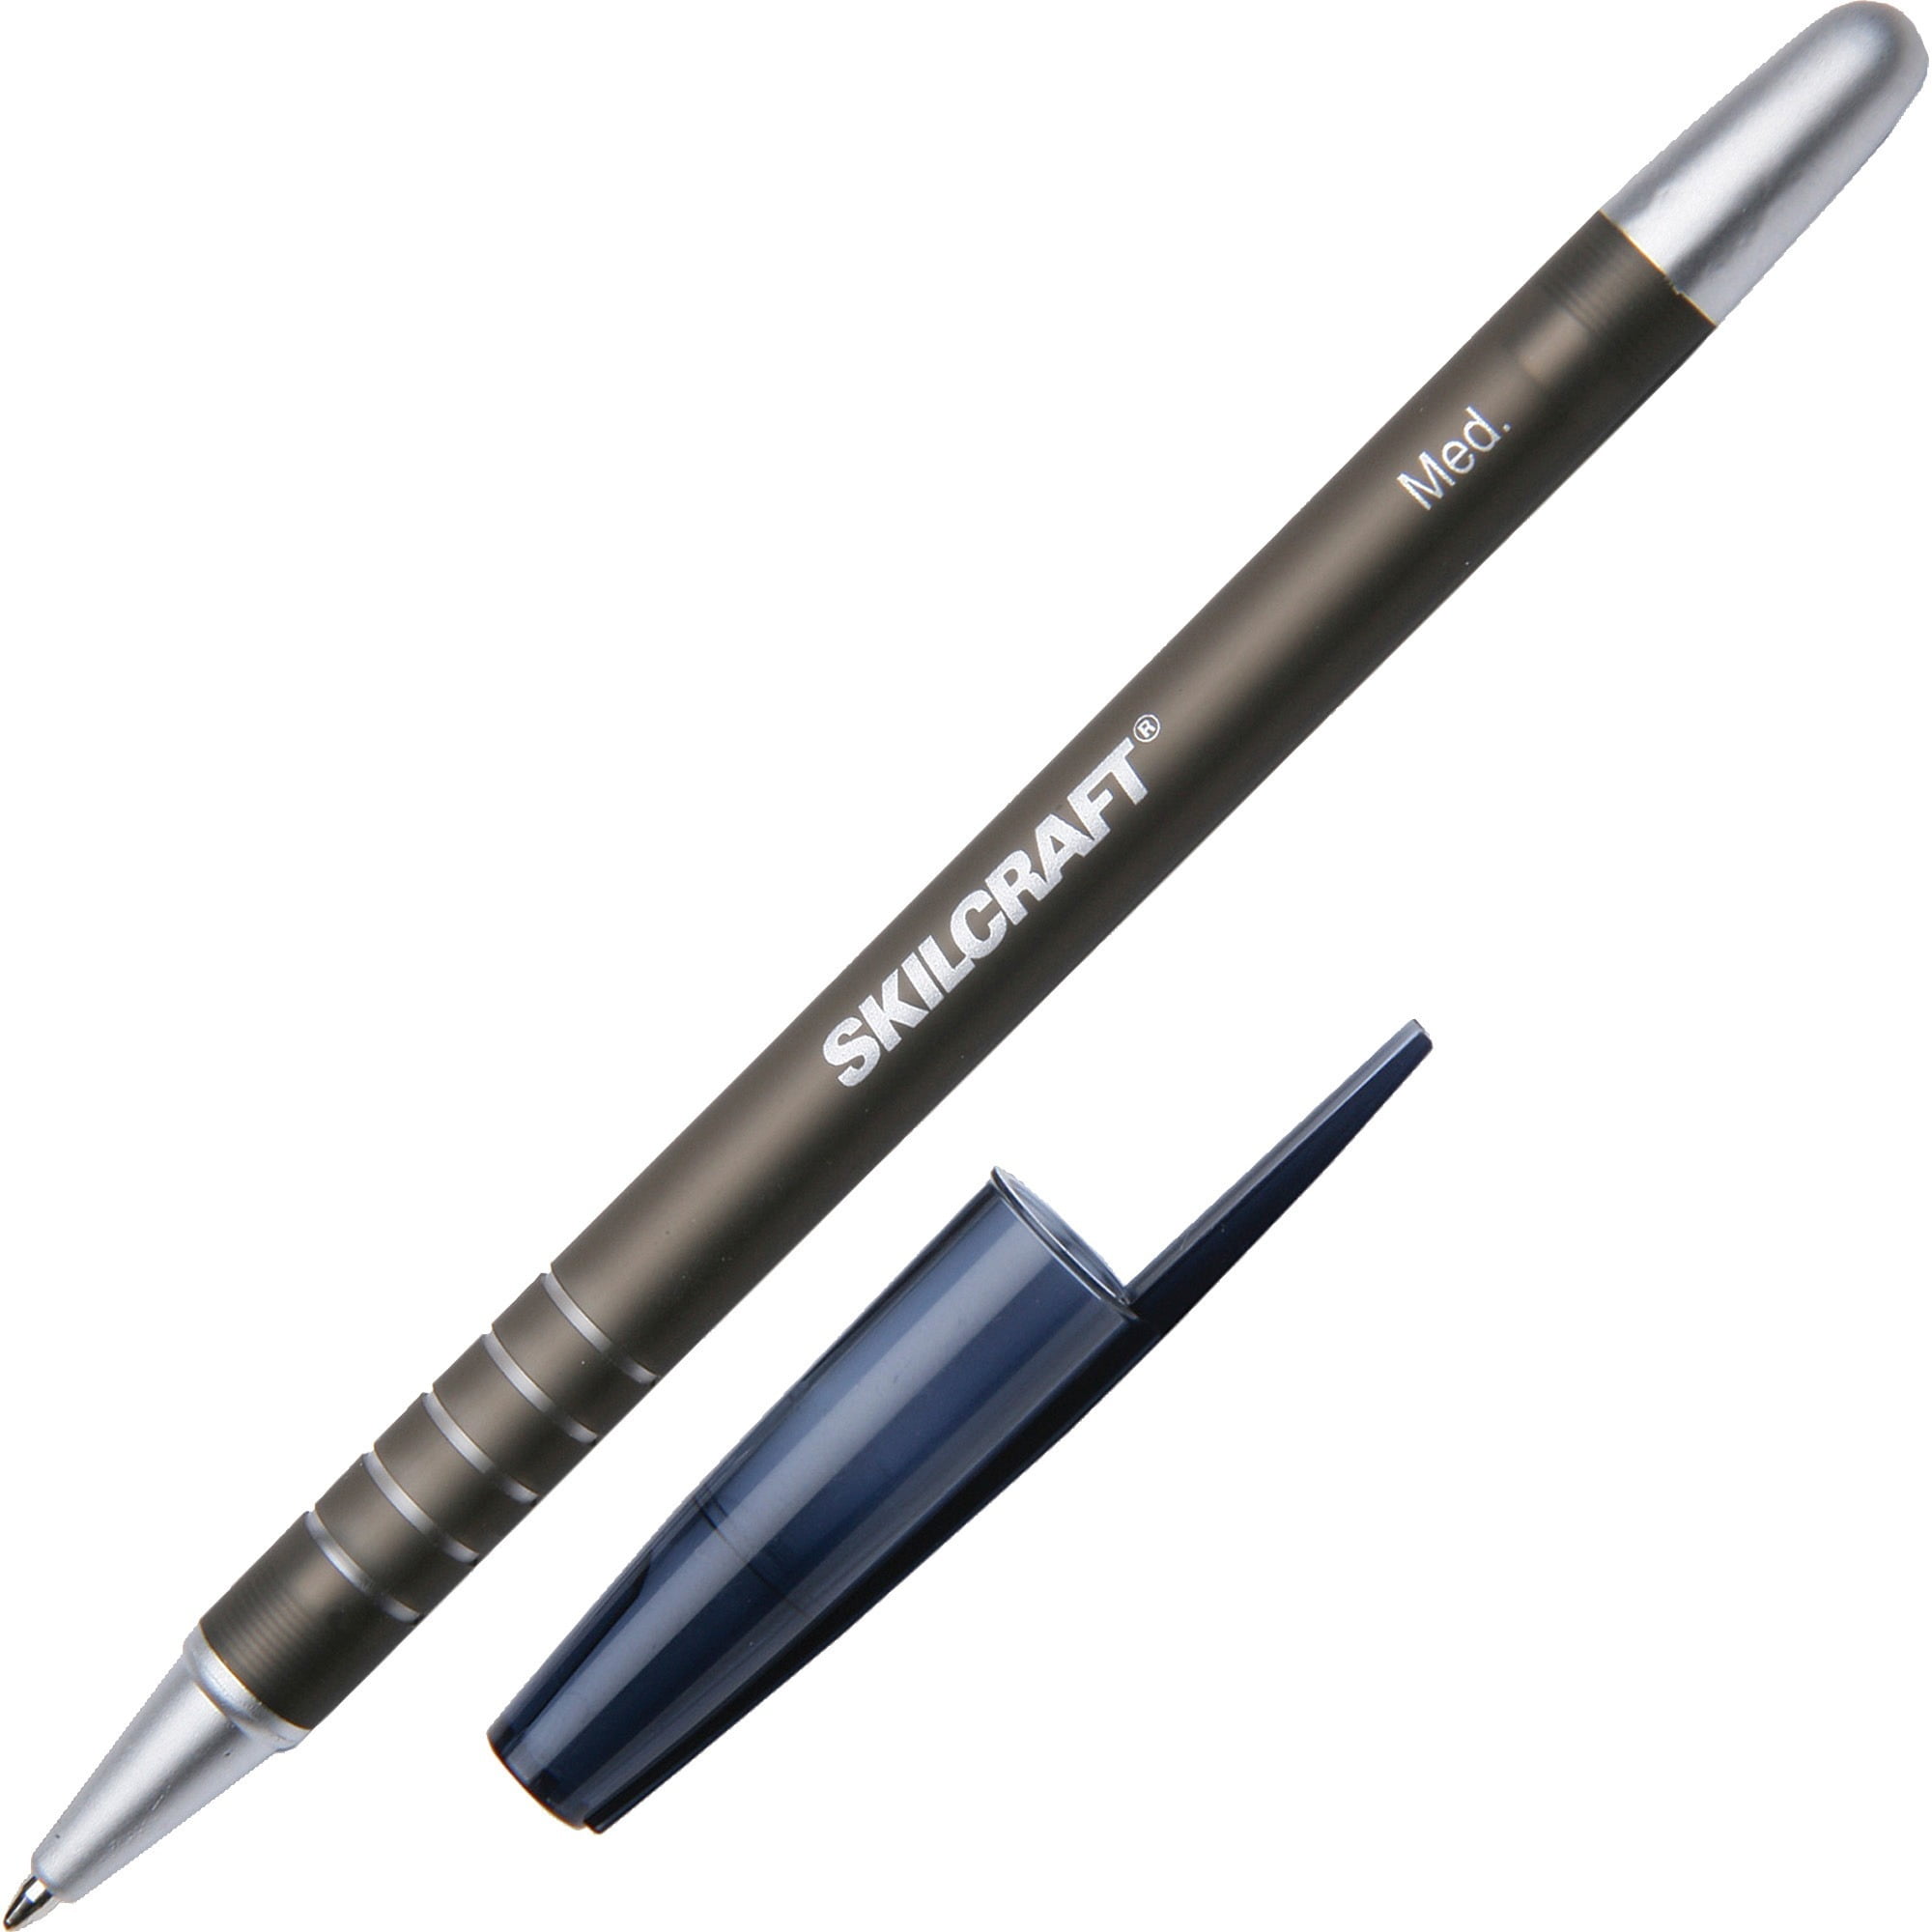 The Pencil Grip Heavyweight Ballpoint Pen with Grip, Ergonomic and Best Pens  for Smooth Writing, 2.4 Oz- TPG-651 